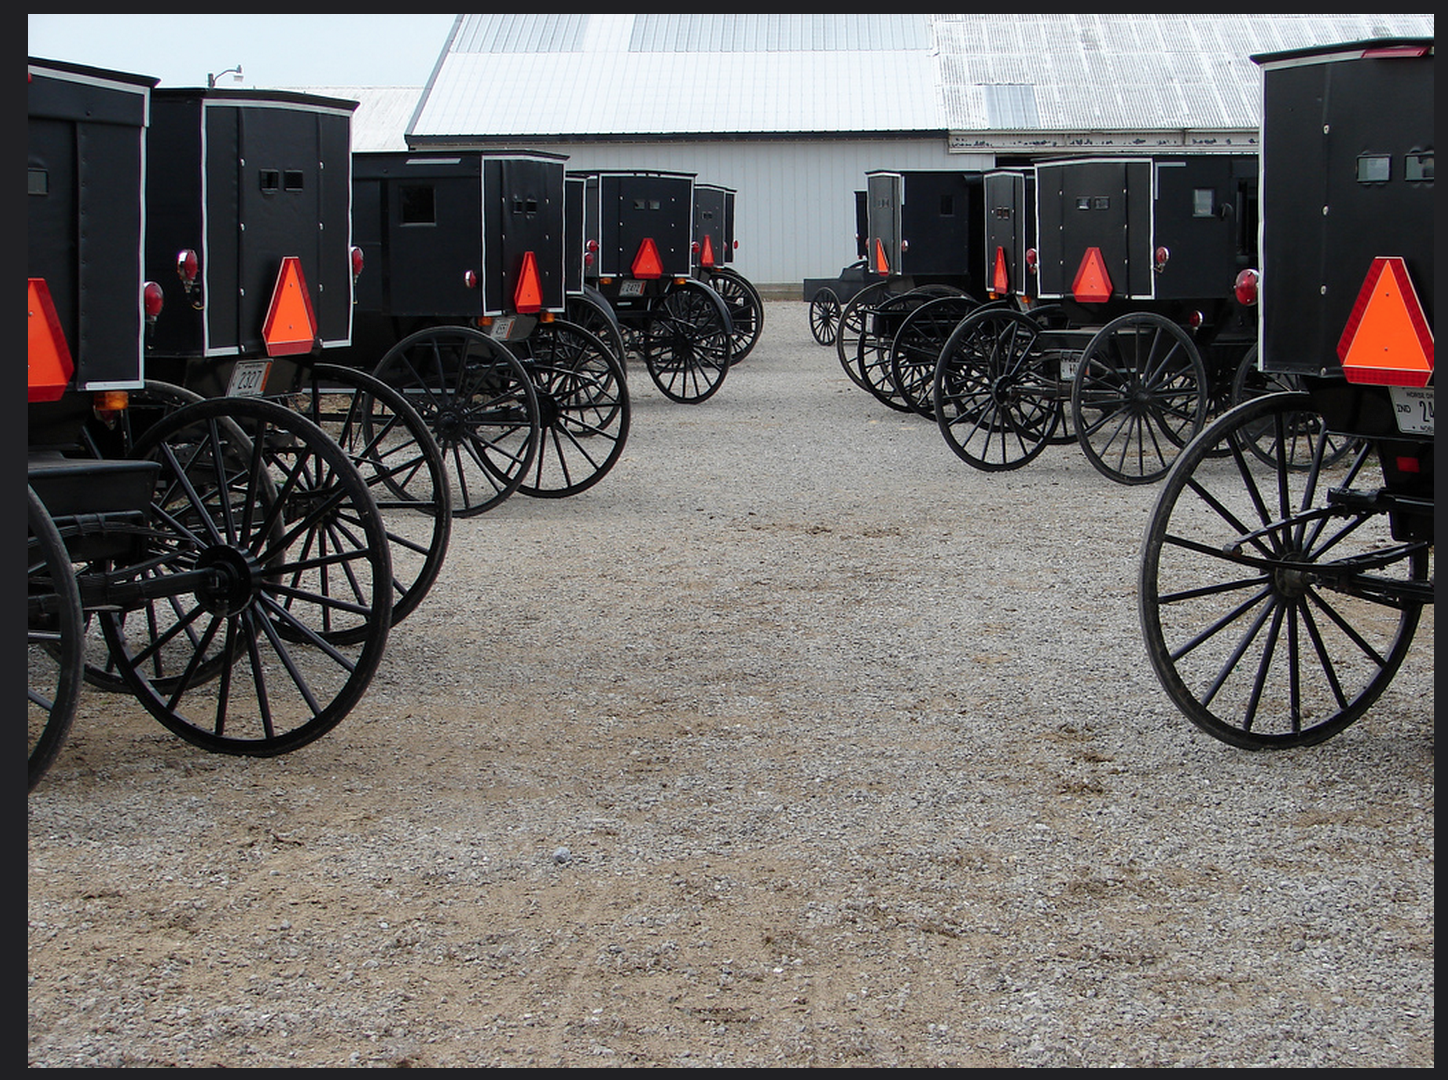 Everything You Want to Know About Amish Beliefs - Social Shunning